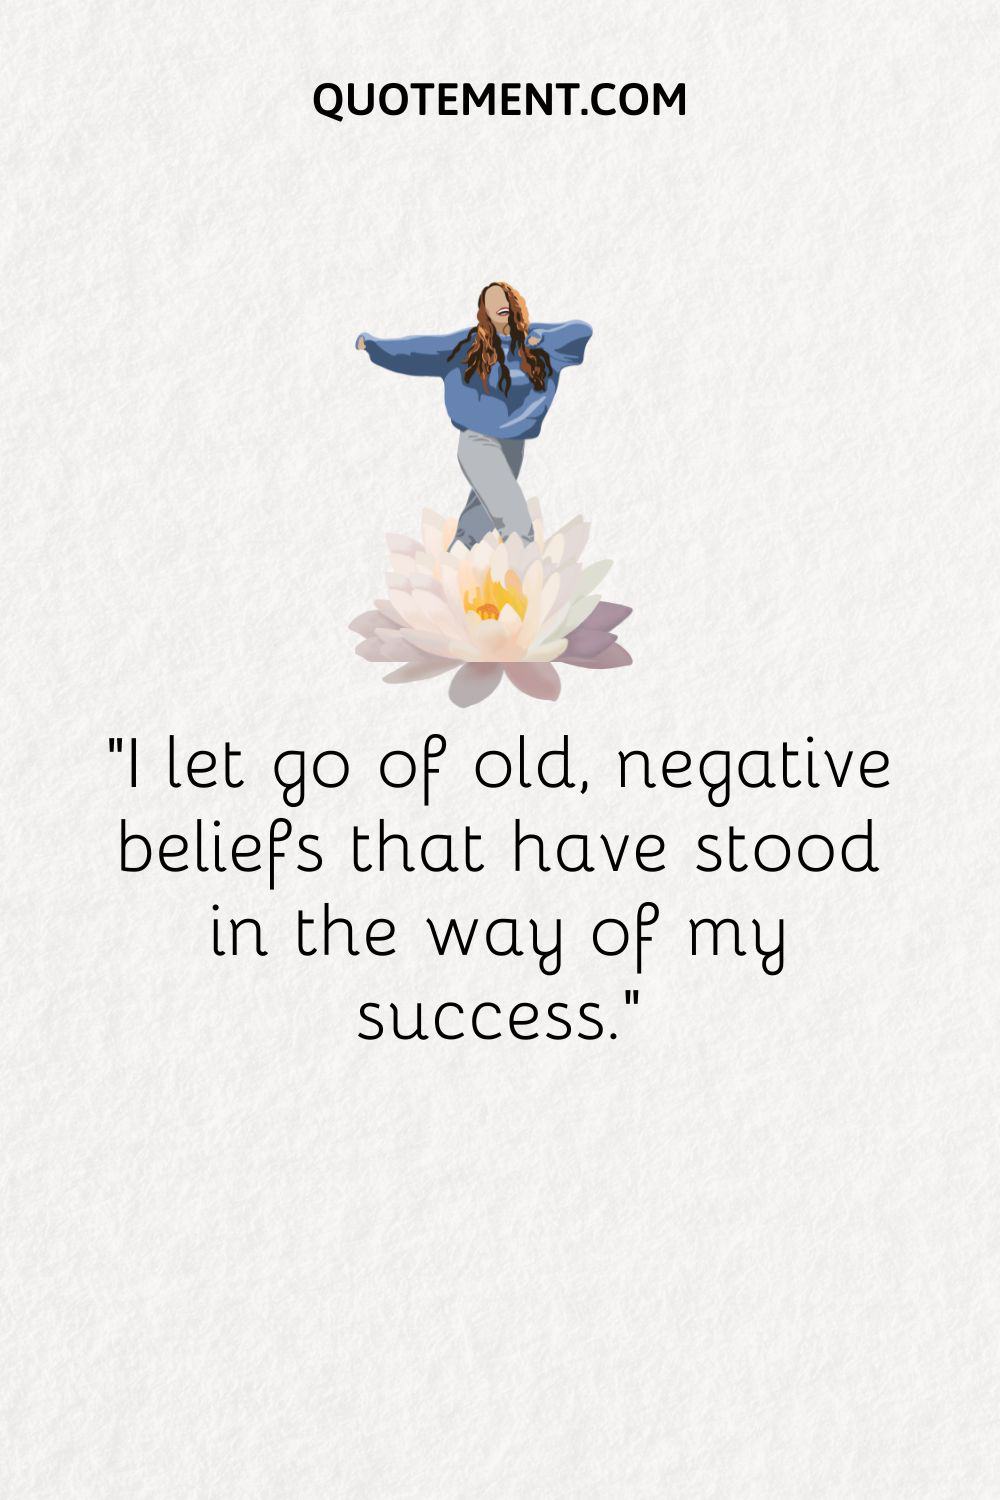 I let go of old, negative beliefs that have stood in the way of my success